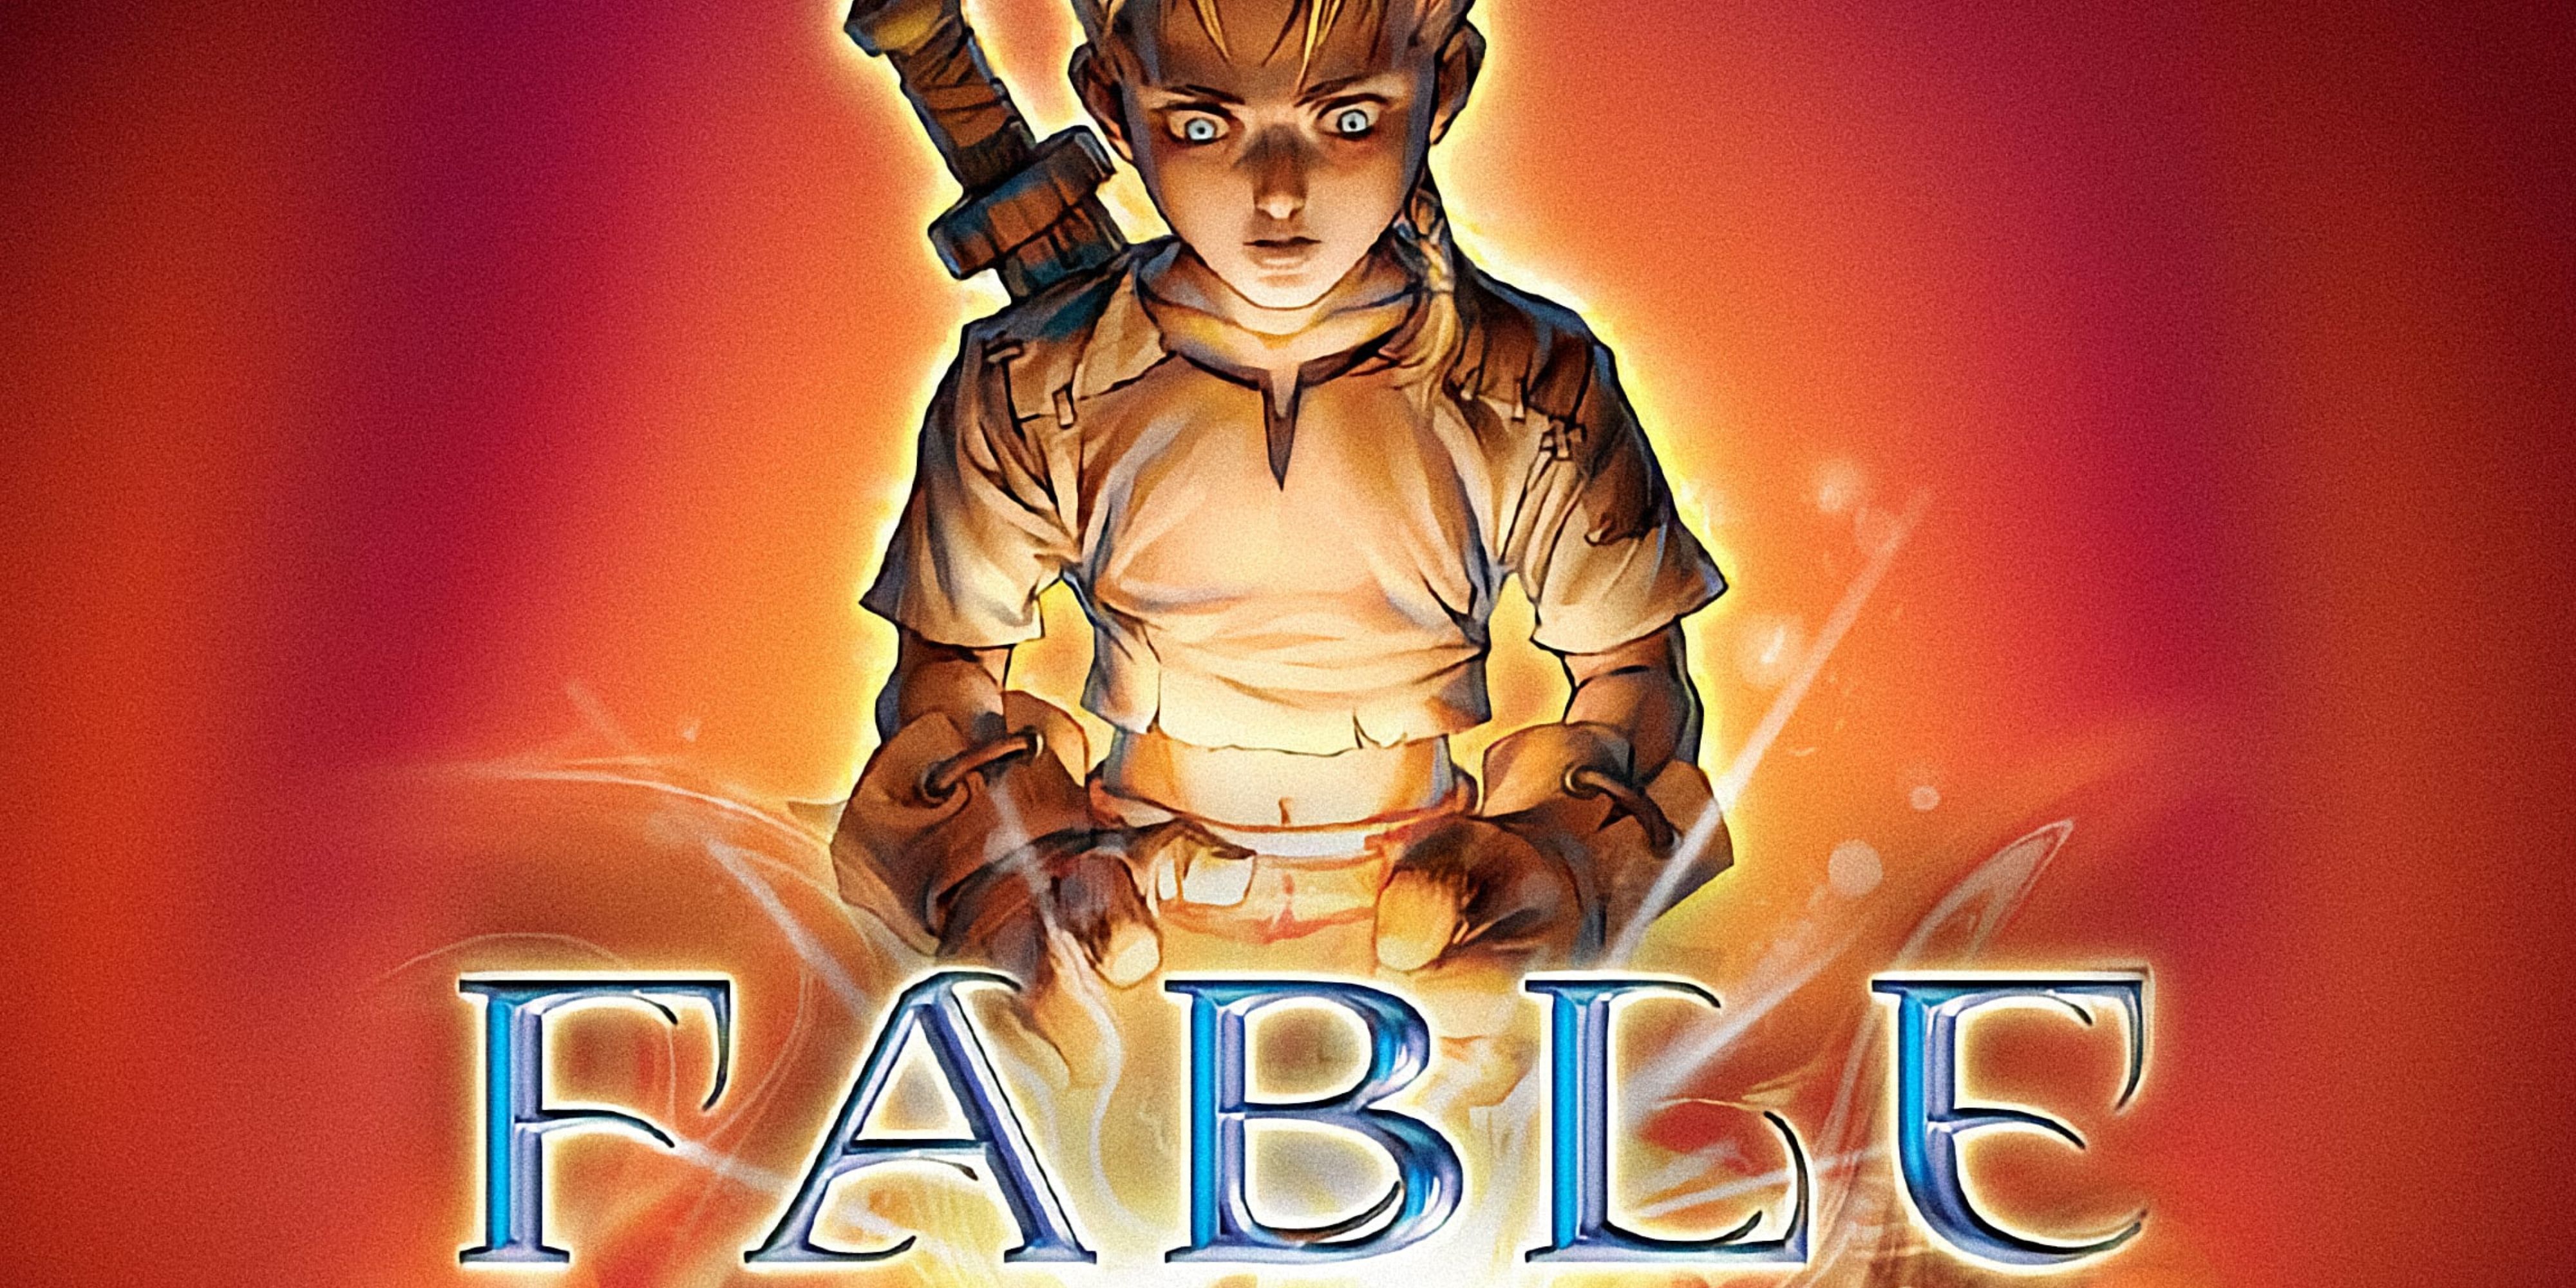 Fable by Lionhead with game title